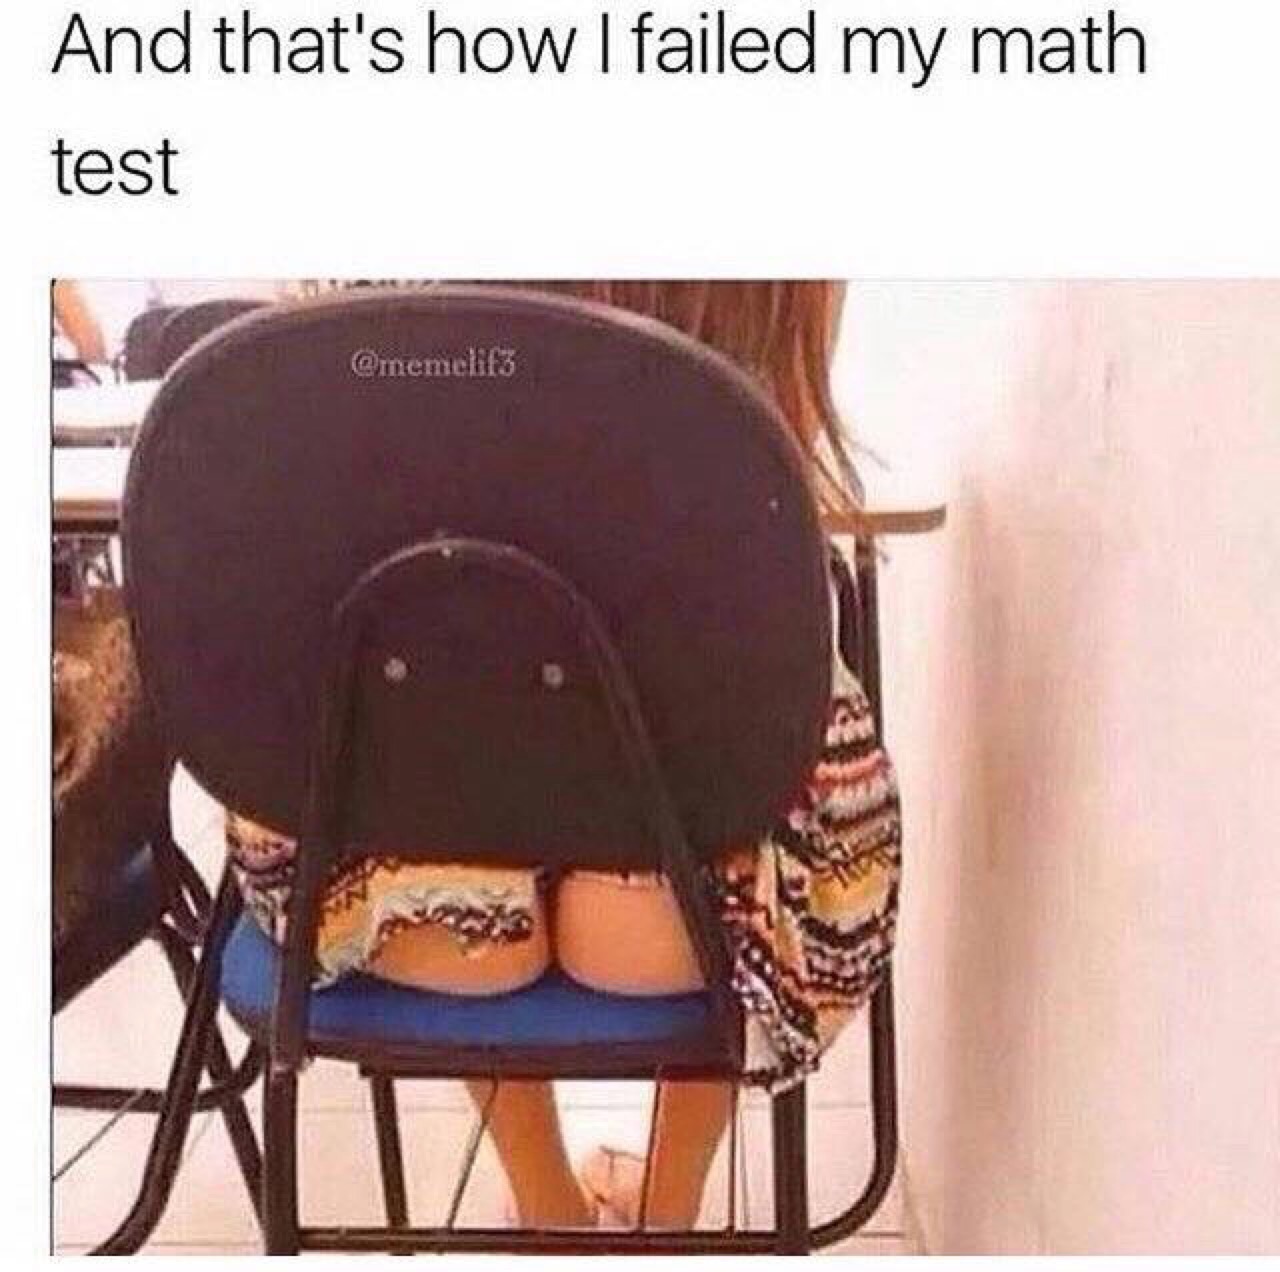 that's how i failed my math test - And that's how I failed my math test